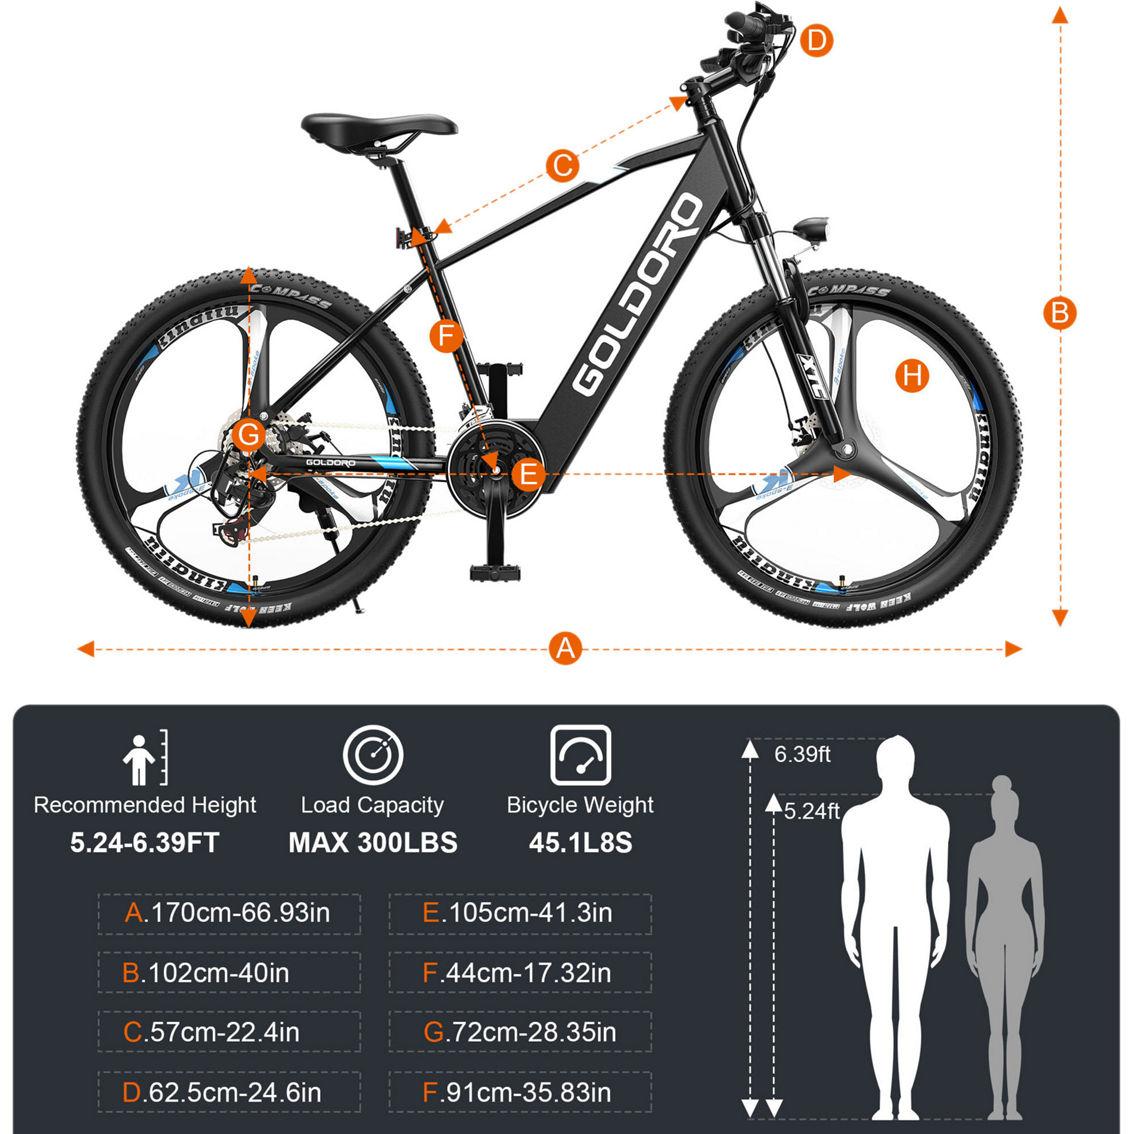 Goldoro Bikes X7 350W 26 in. Electric Mountain Bike with Alloy Wheels - Image 6 of 10